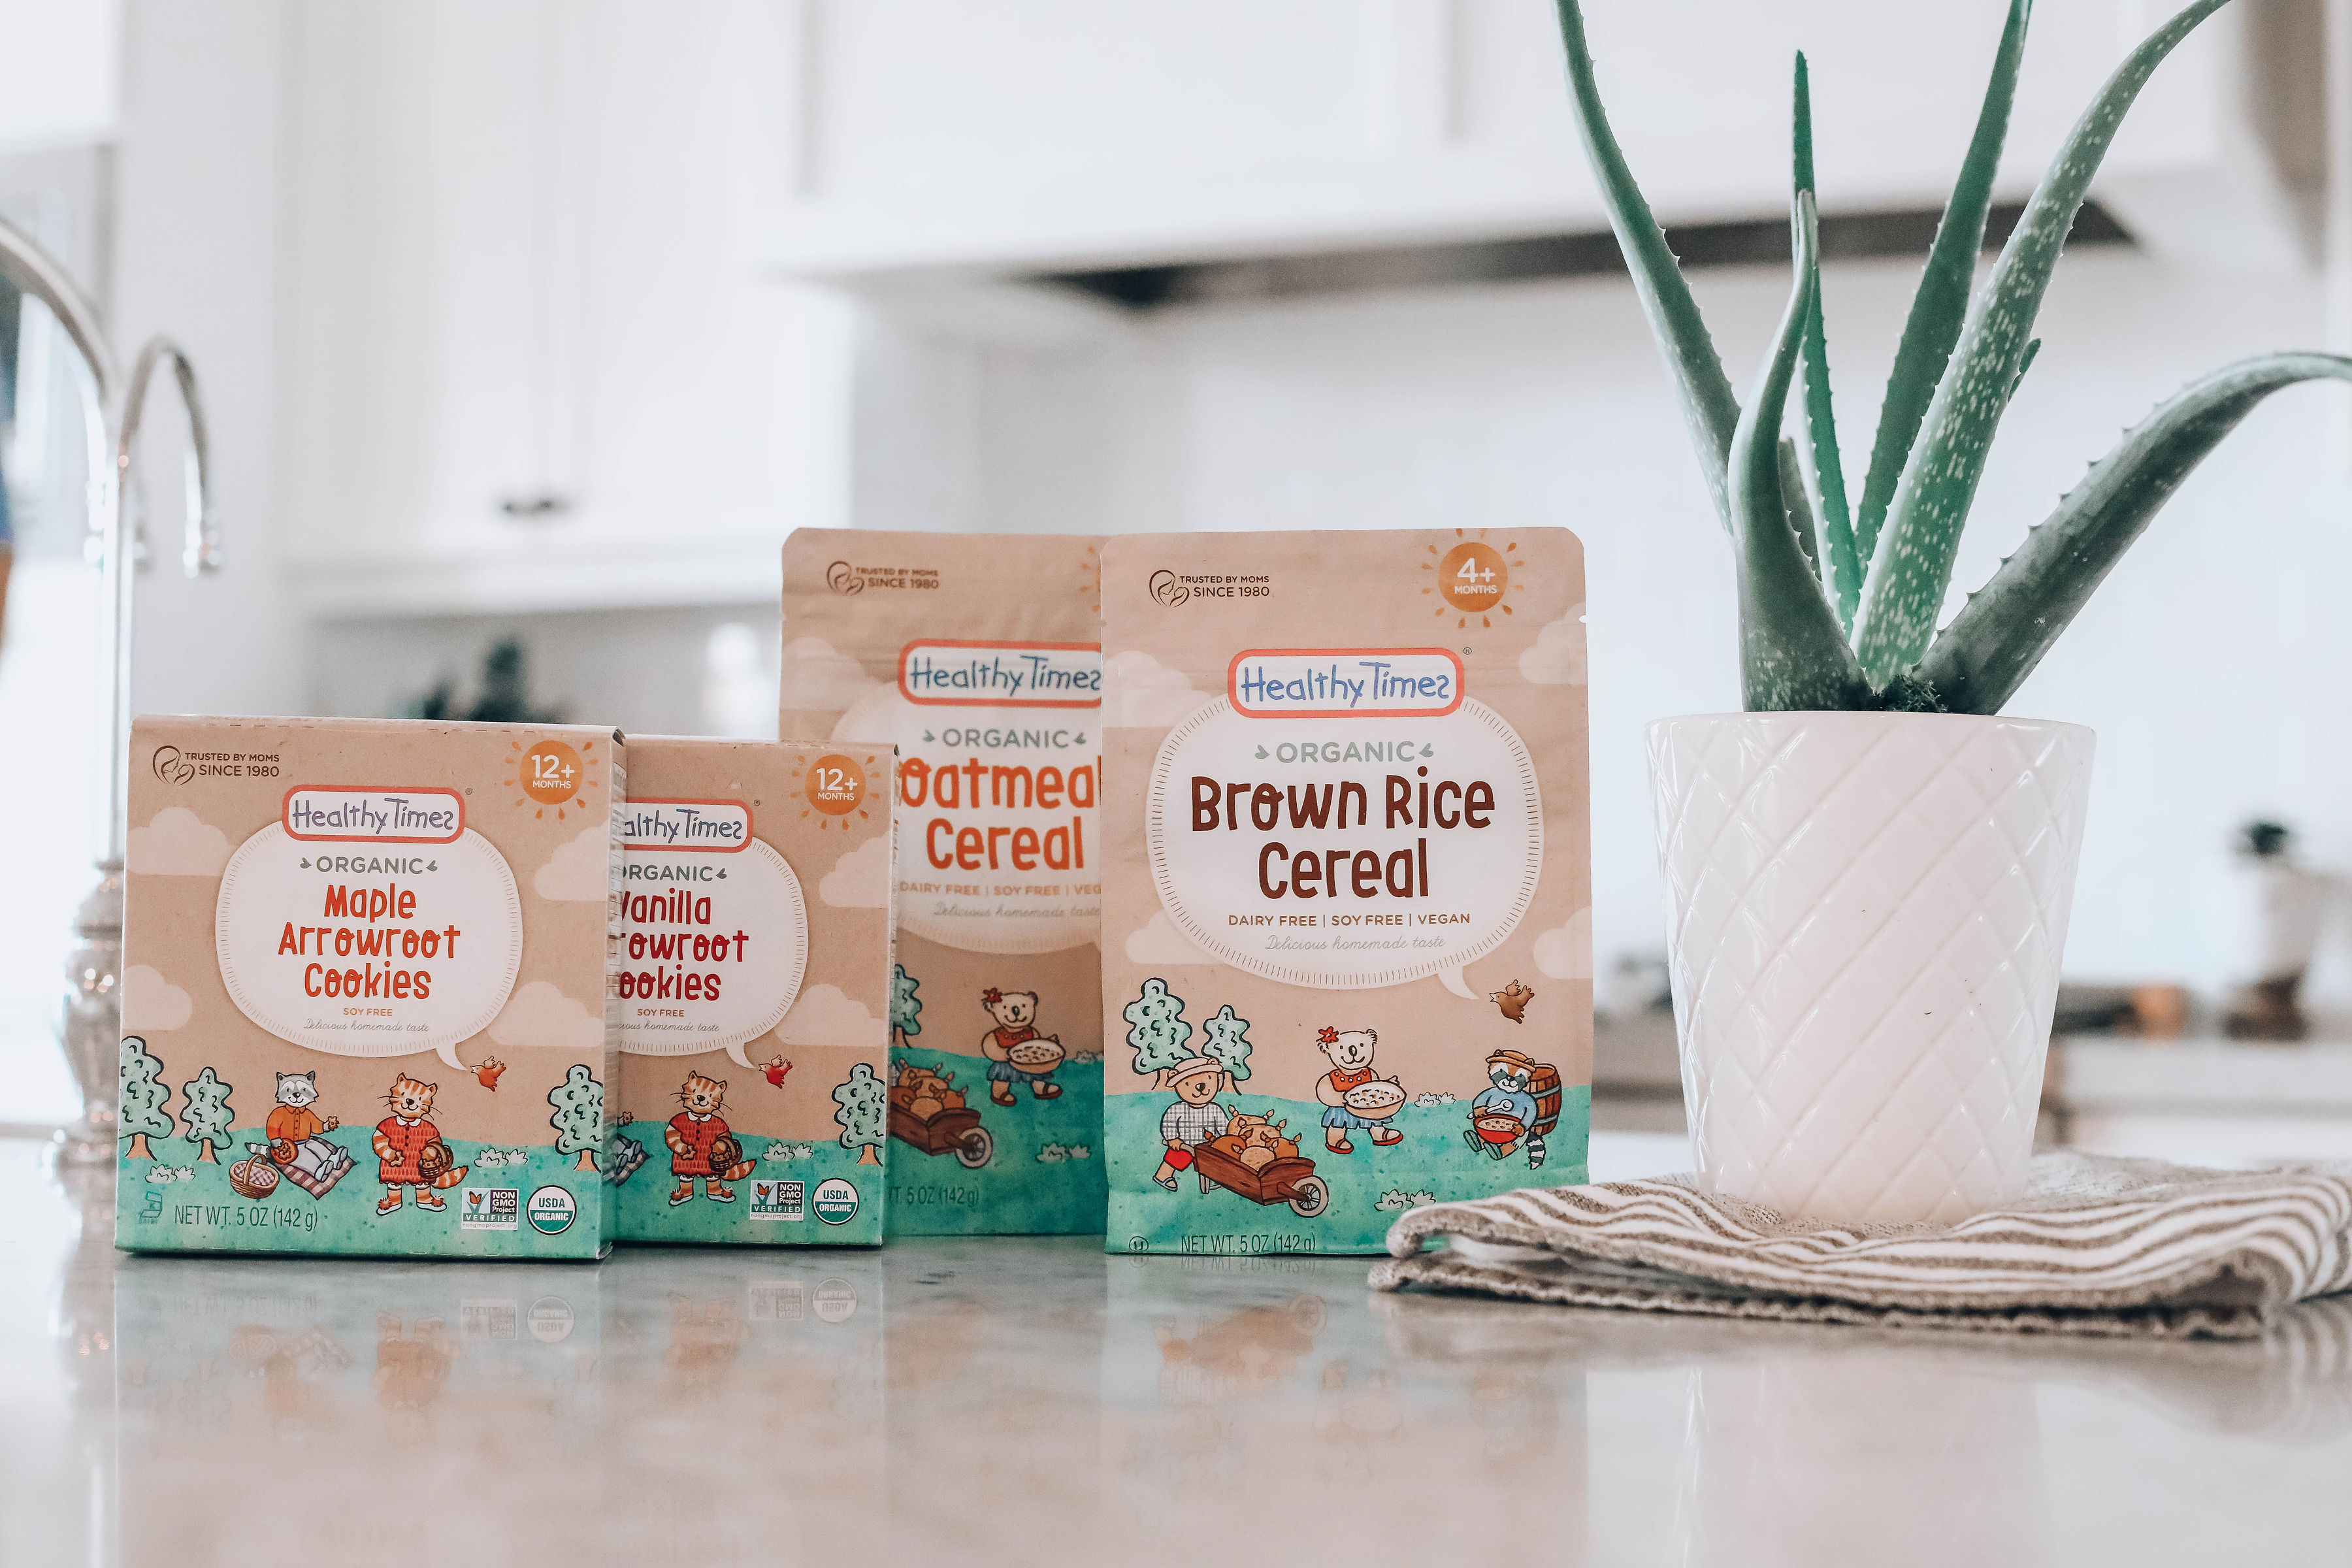 Reno Blogger, Emily Farren Wieczorek talks about transitioning her daughter to solids with Healthy Times Organic Brown RIce Baby Cereal